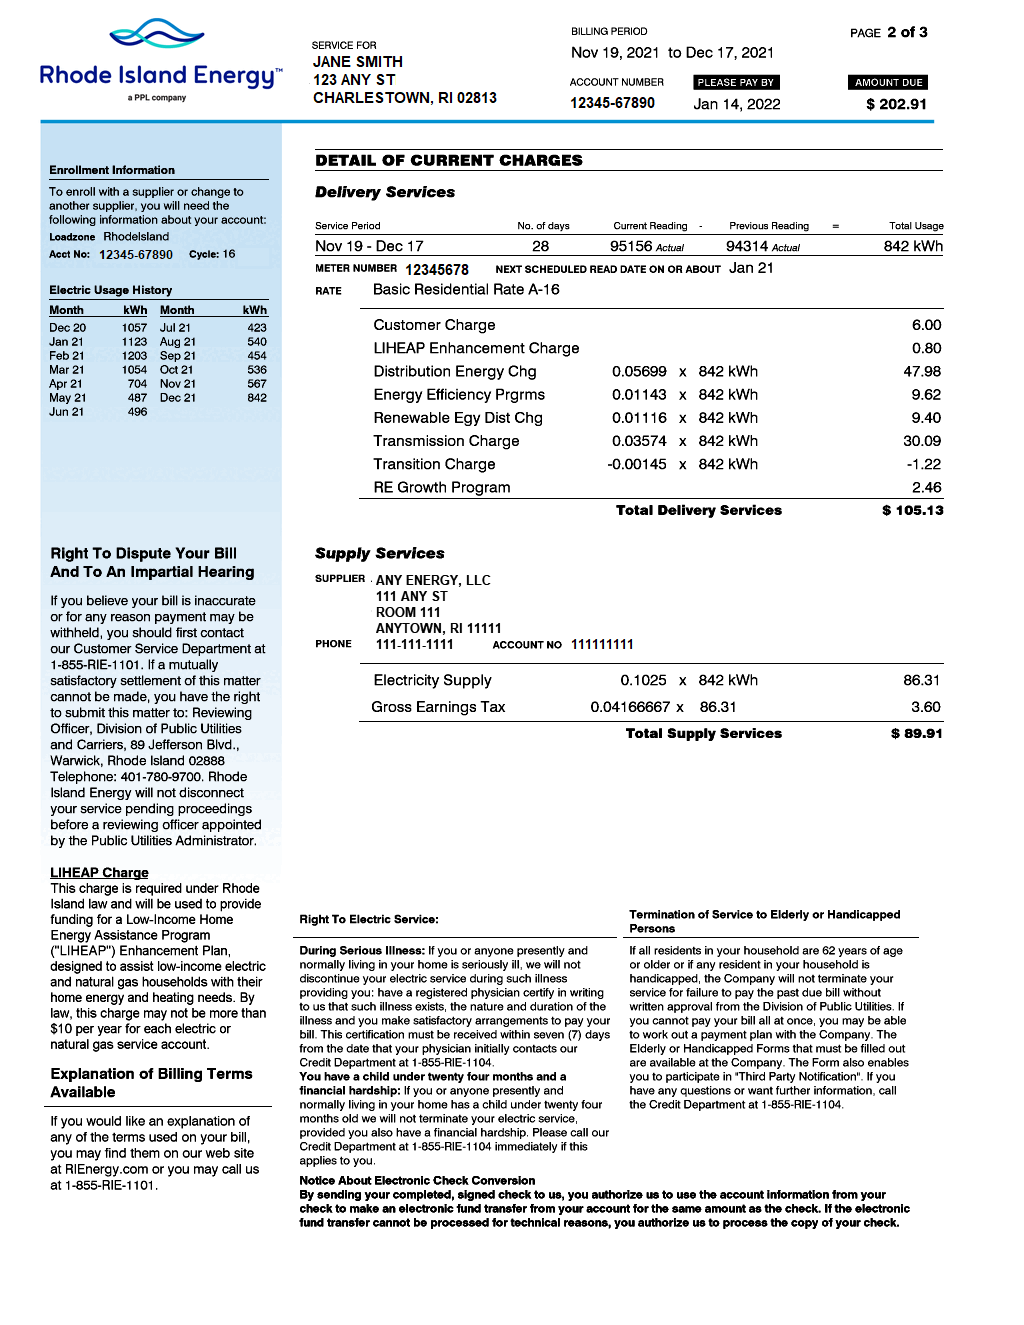 Budget Electric Bill - Page 2